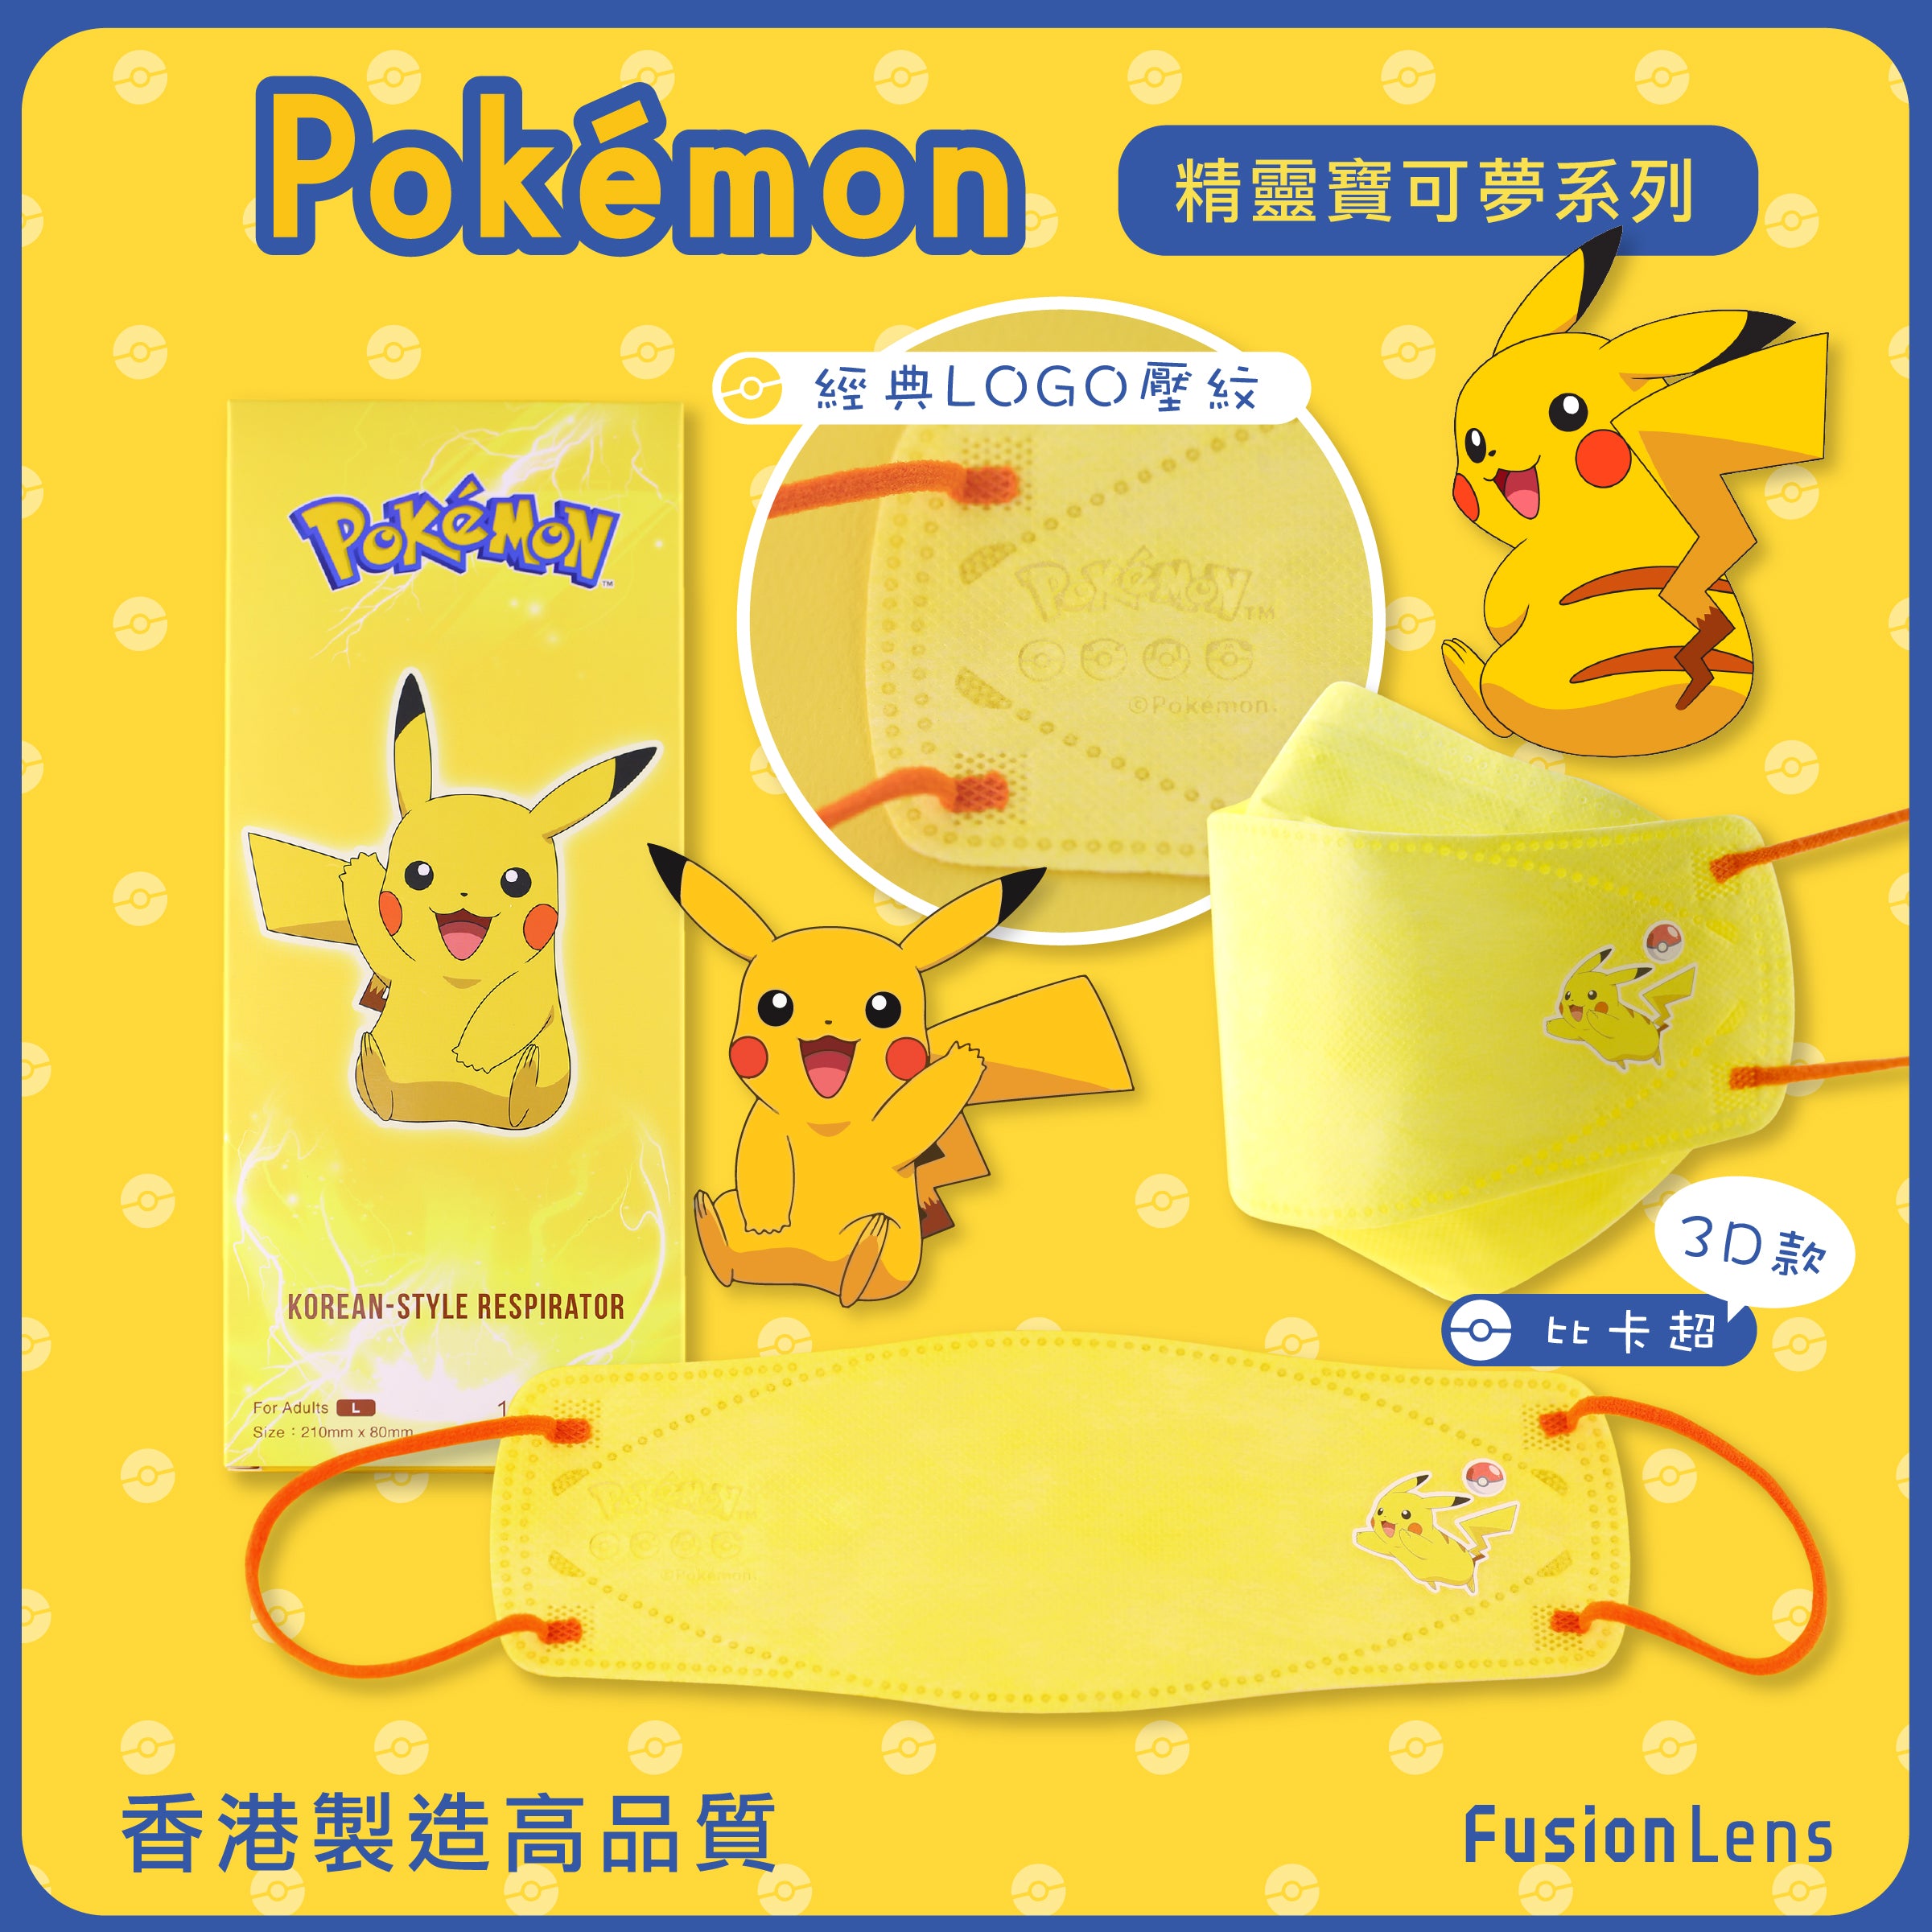 Medical Face Mask ged Pokemon Fusionlens